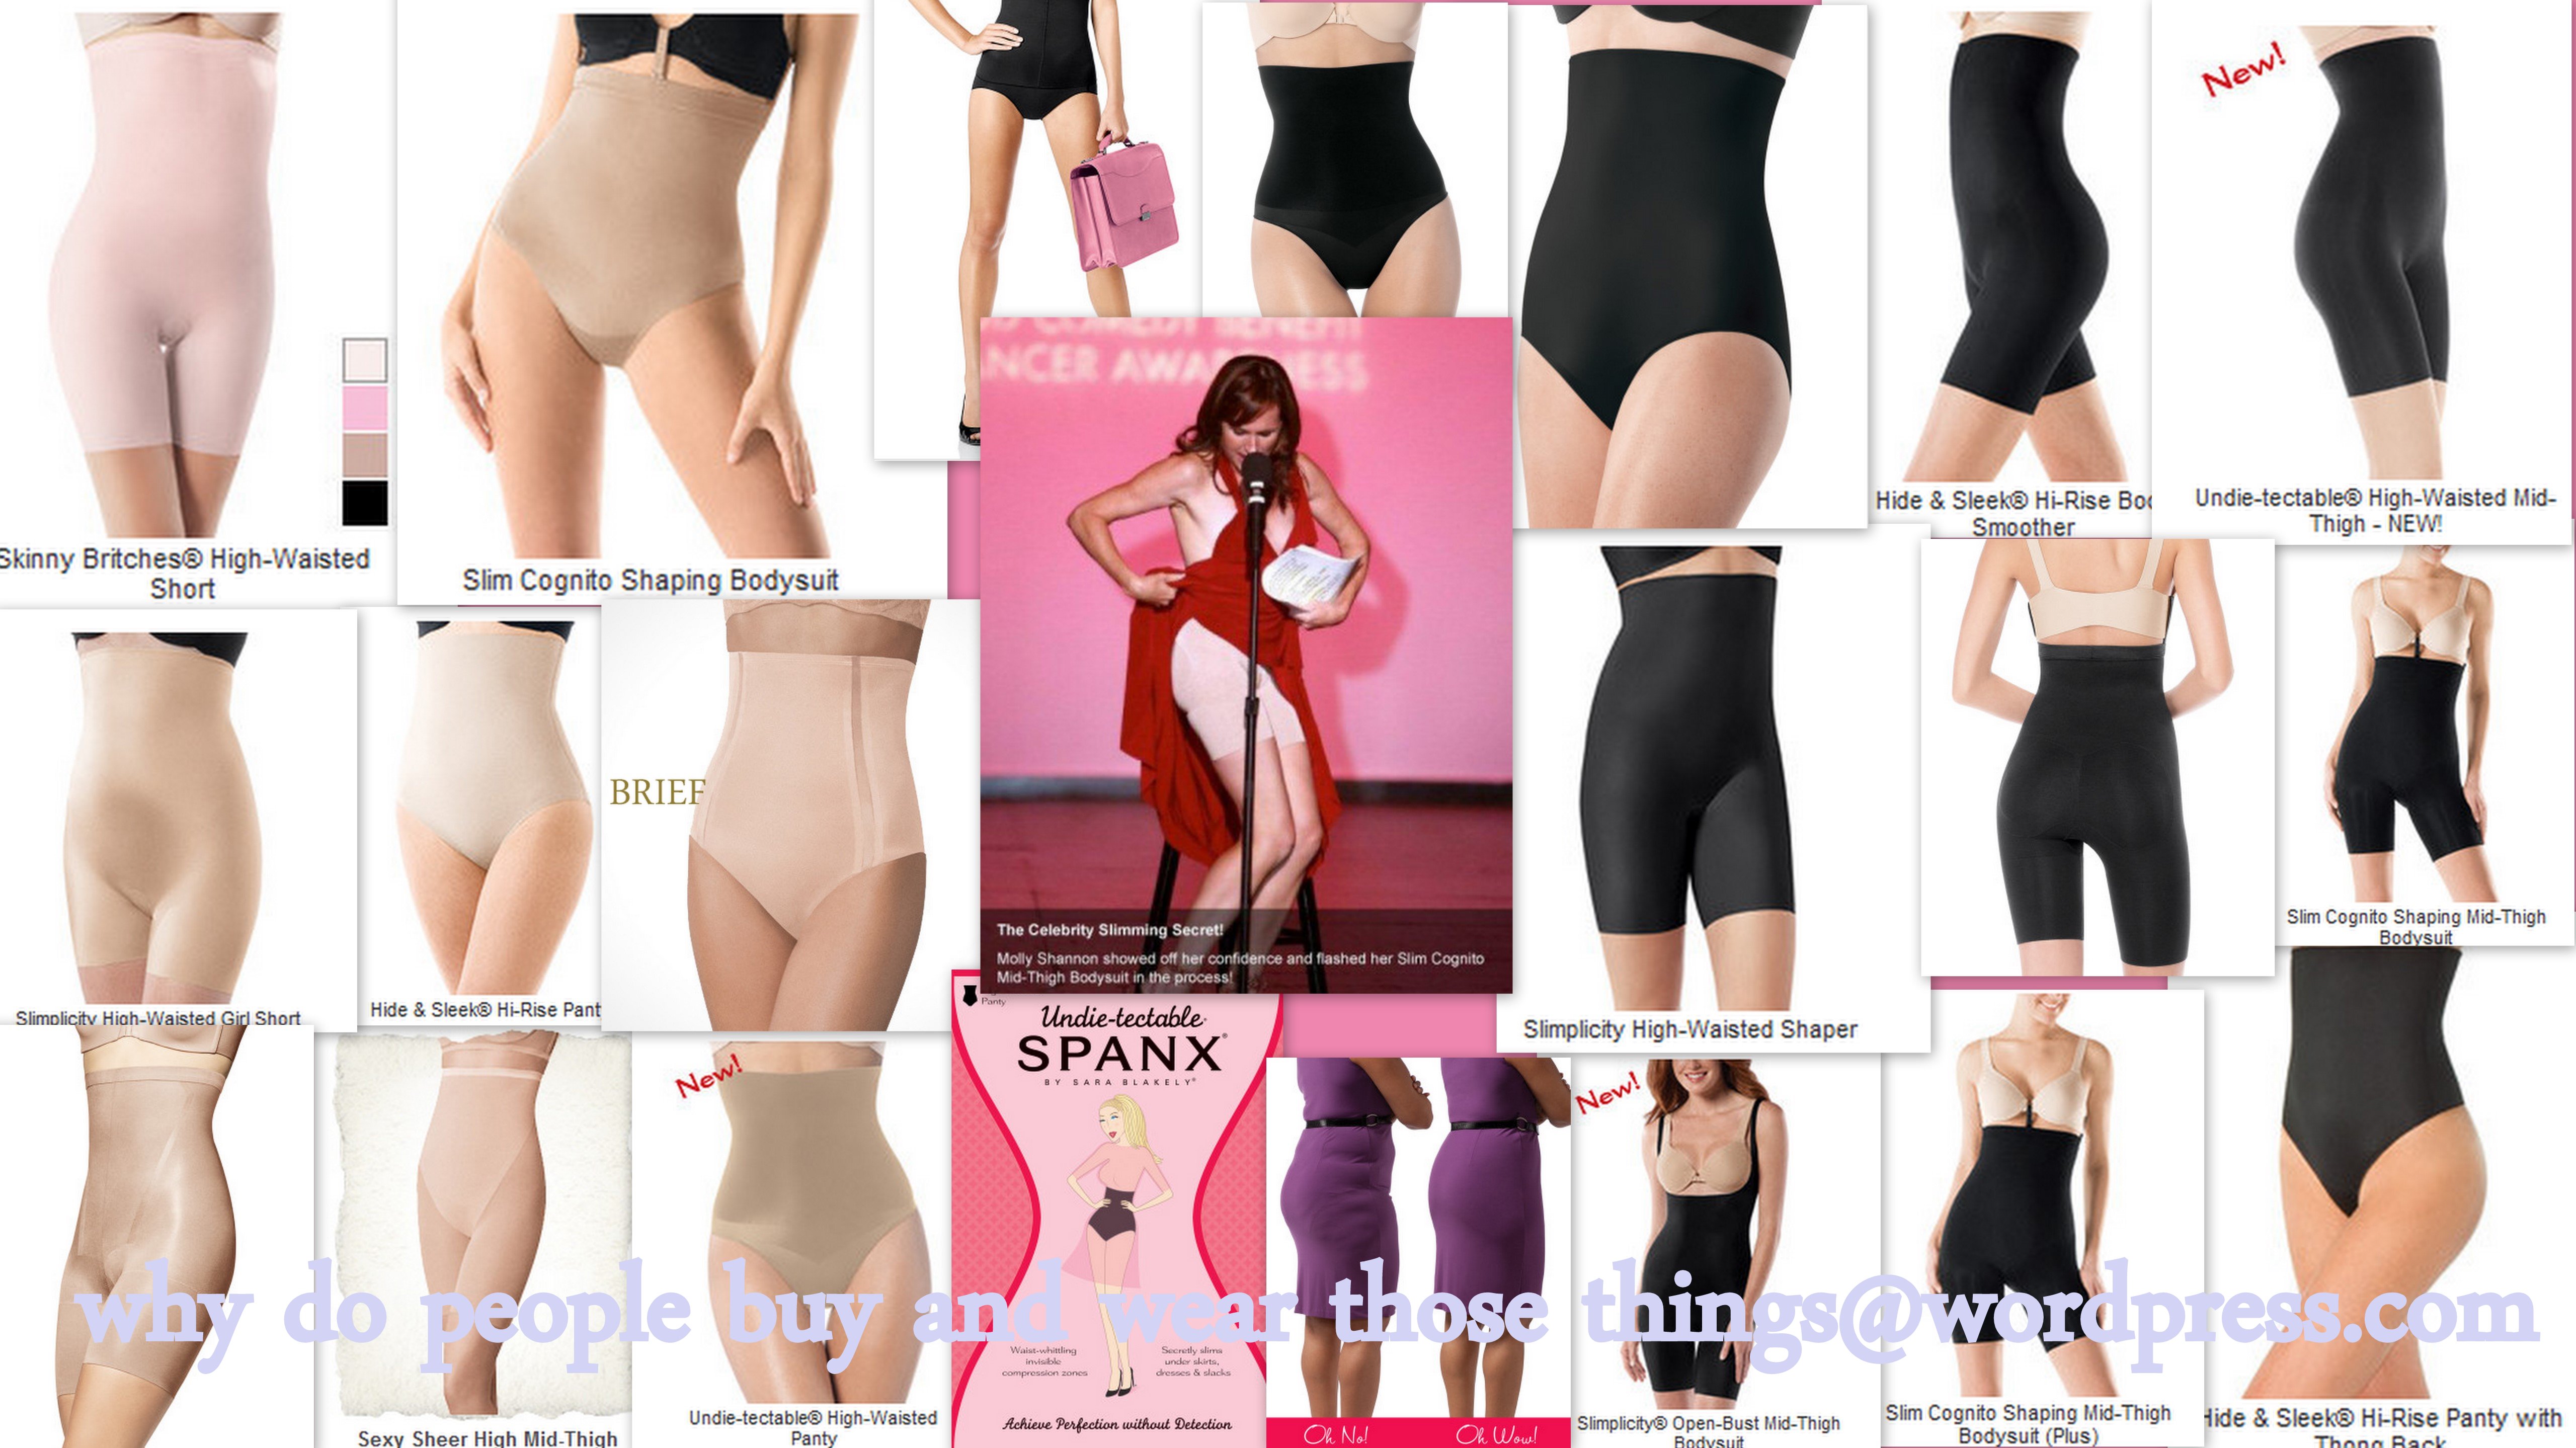 Spanx  Why Do People Buy and Wear Those Things?